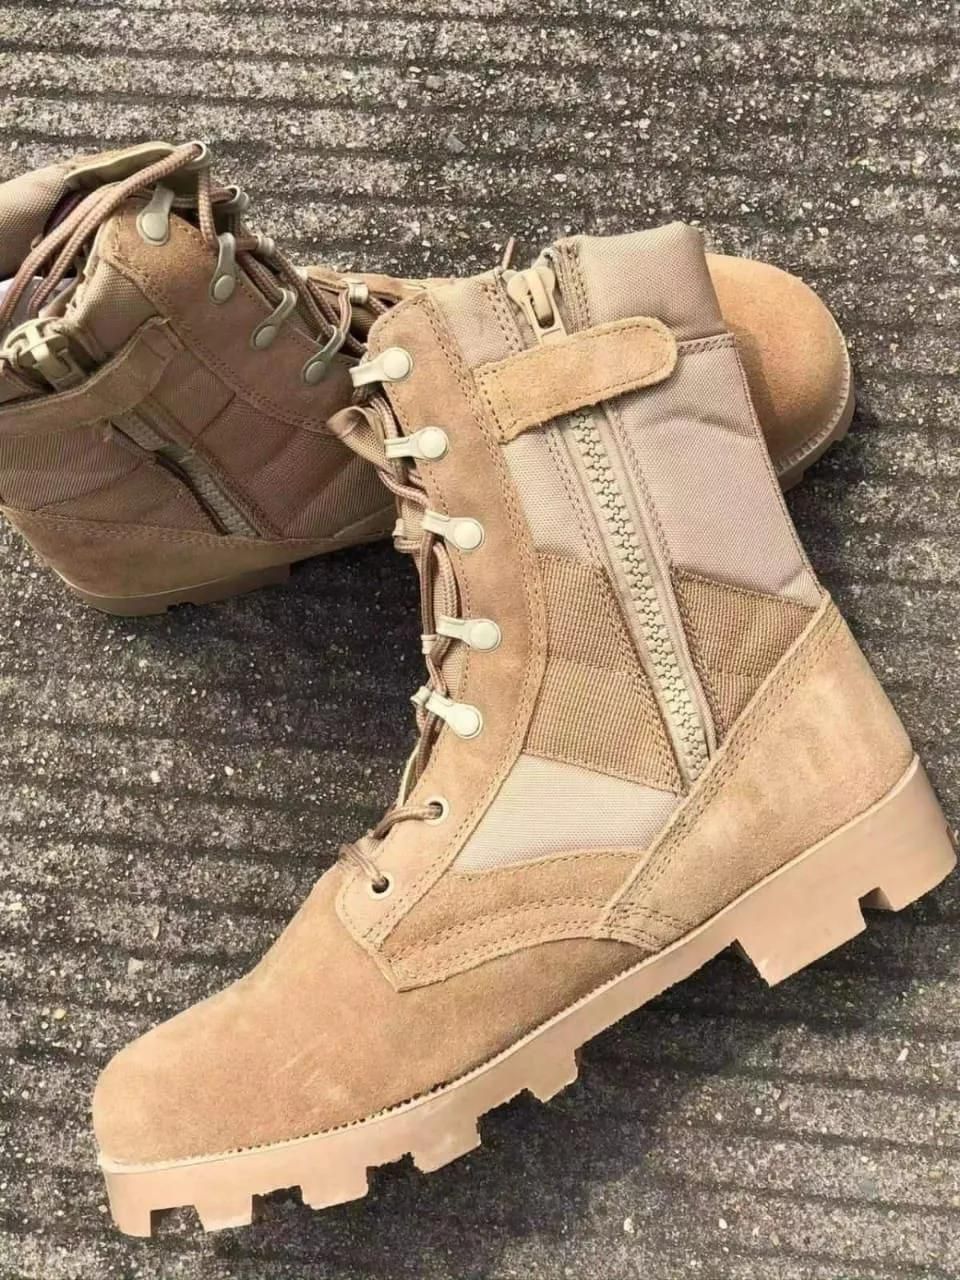 Men Military Tactical Boots High-top Combat Boots Police Patrol Army Training Shoes Lightweight Hiking Large Size Safety Ankle Boots,Khaki Ankle and Bootie